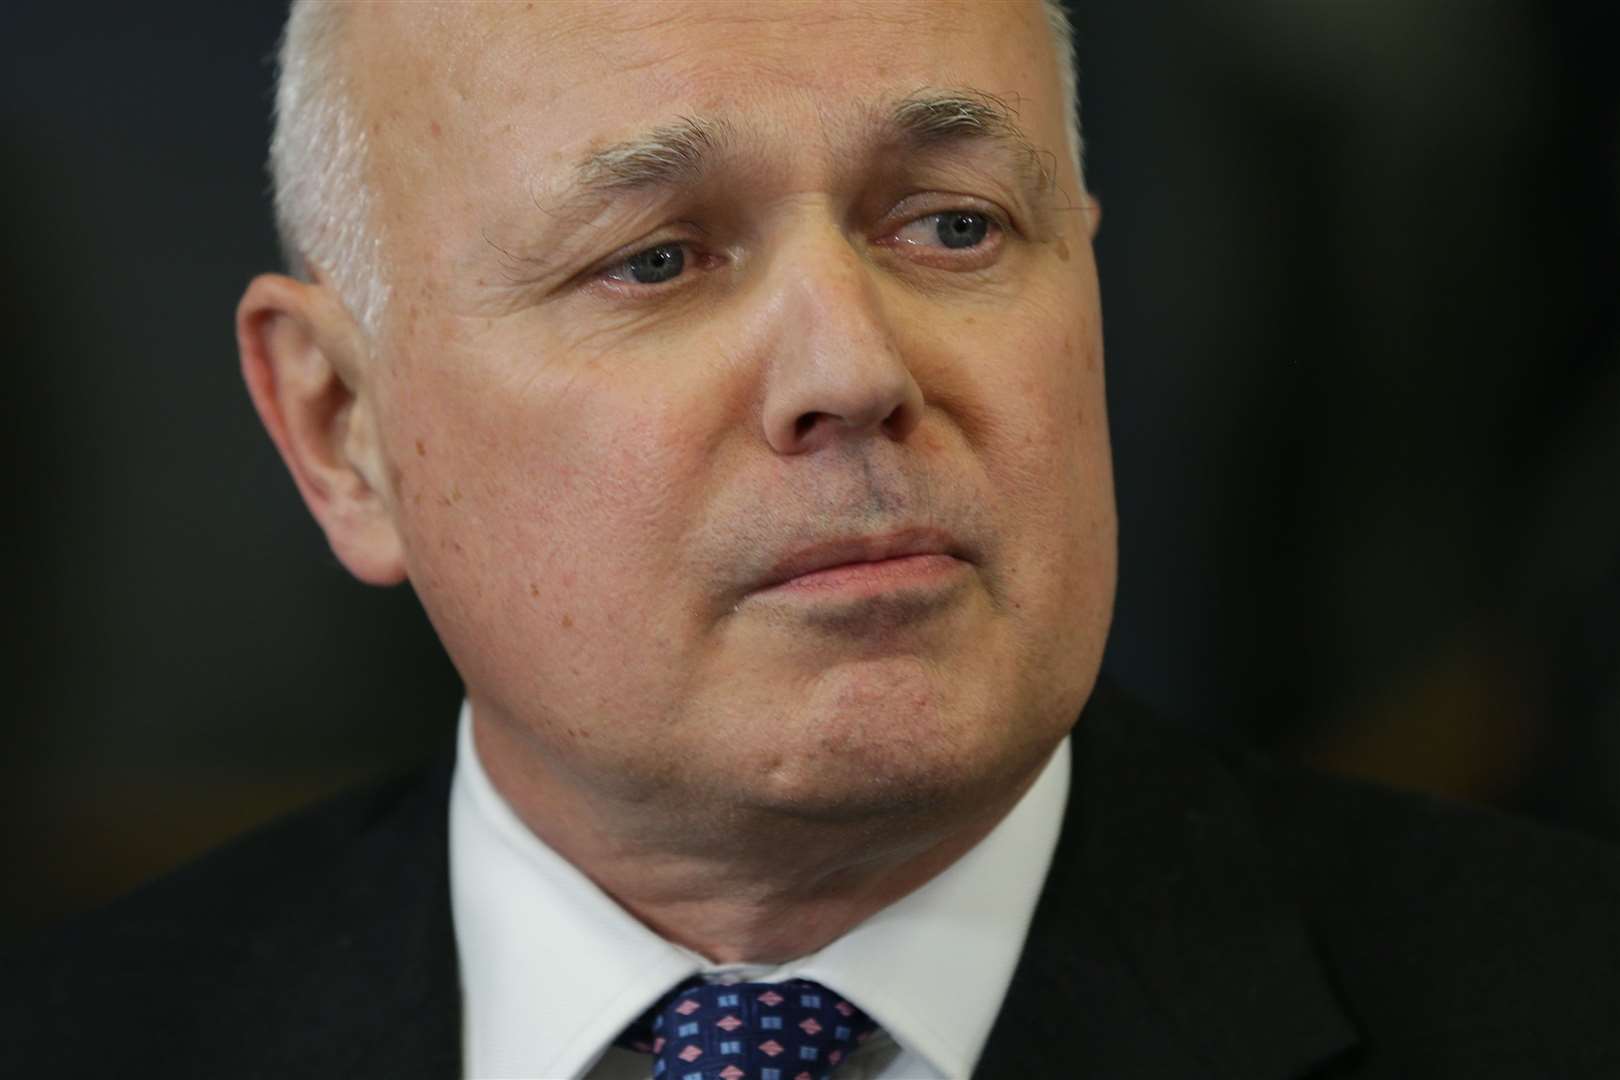 Sir Iain Duncan Smith said the deal would allow the UK to take back sovereignty (Daniel Leal-Olivas/PA)